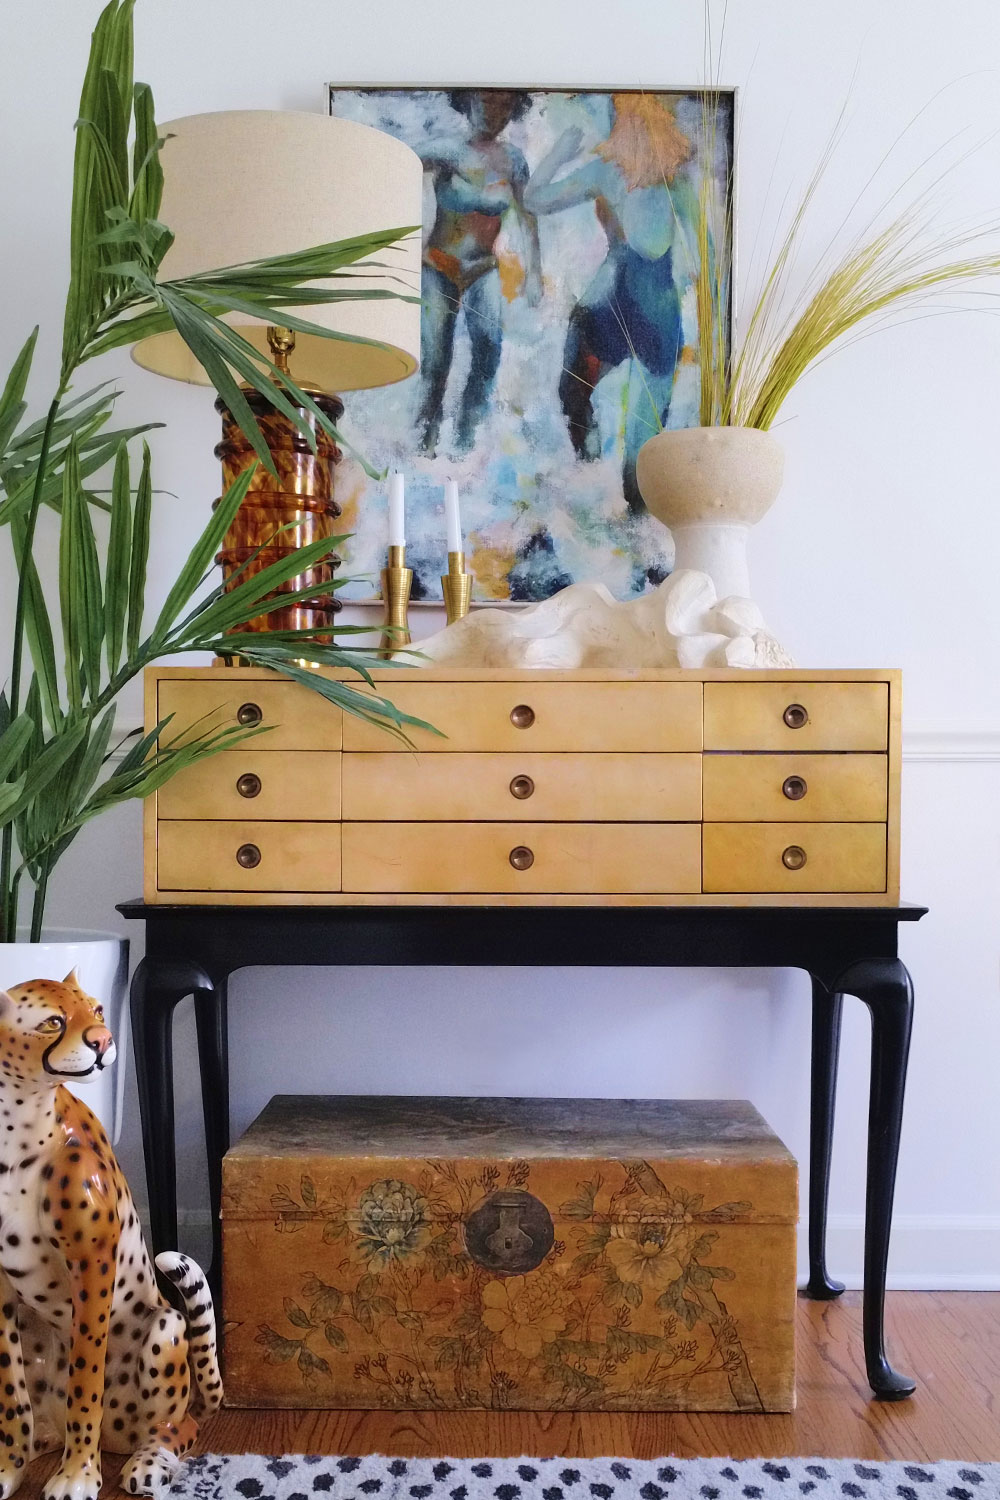 Favorite Vintage Decor - sharing a few favorite antiques I use to decorate my home